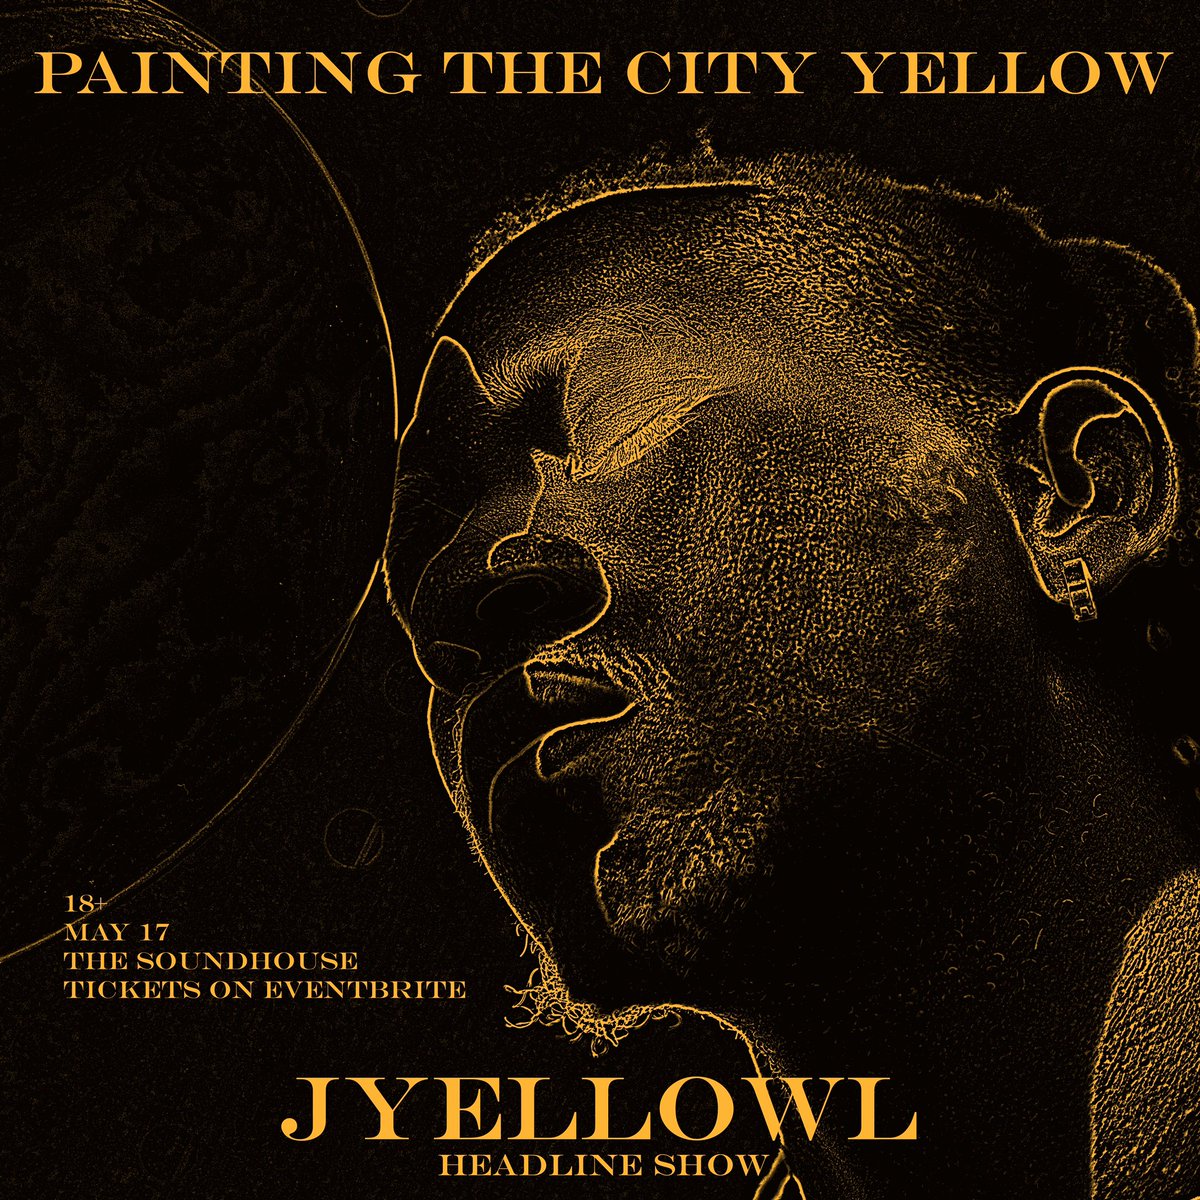 *ANNOUNCEMENT* Dublin Headline Show // Painting The City Yellow 🌕🇮🇪 May 17 live at @thesoundhousedublin Tickets go on sale on Friday 9am on eventbrite Link will be in my bio Been a long time coming!! Self-promoted and brought to you by Yellow 🟡🟡🟡 Y E L L O W S Z N